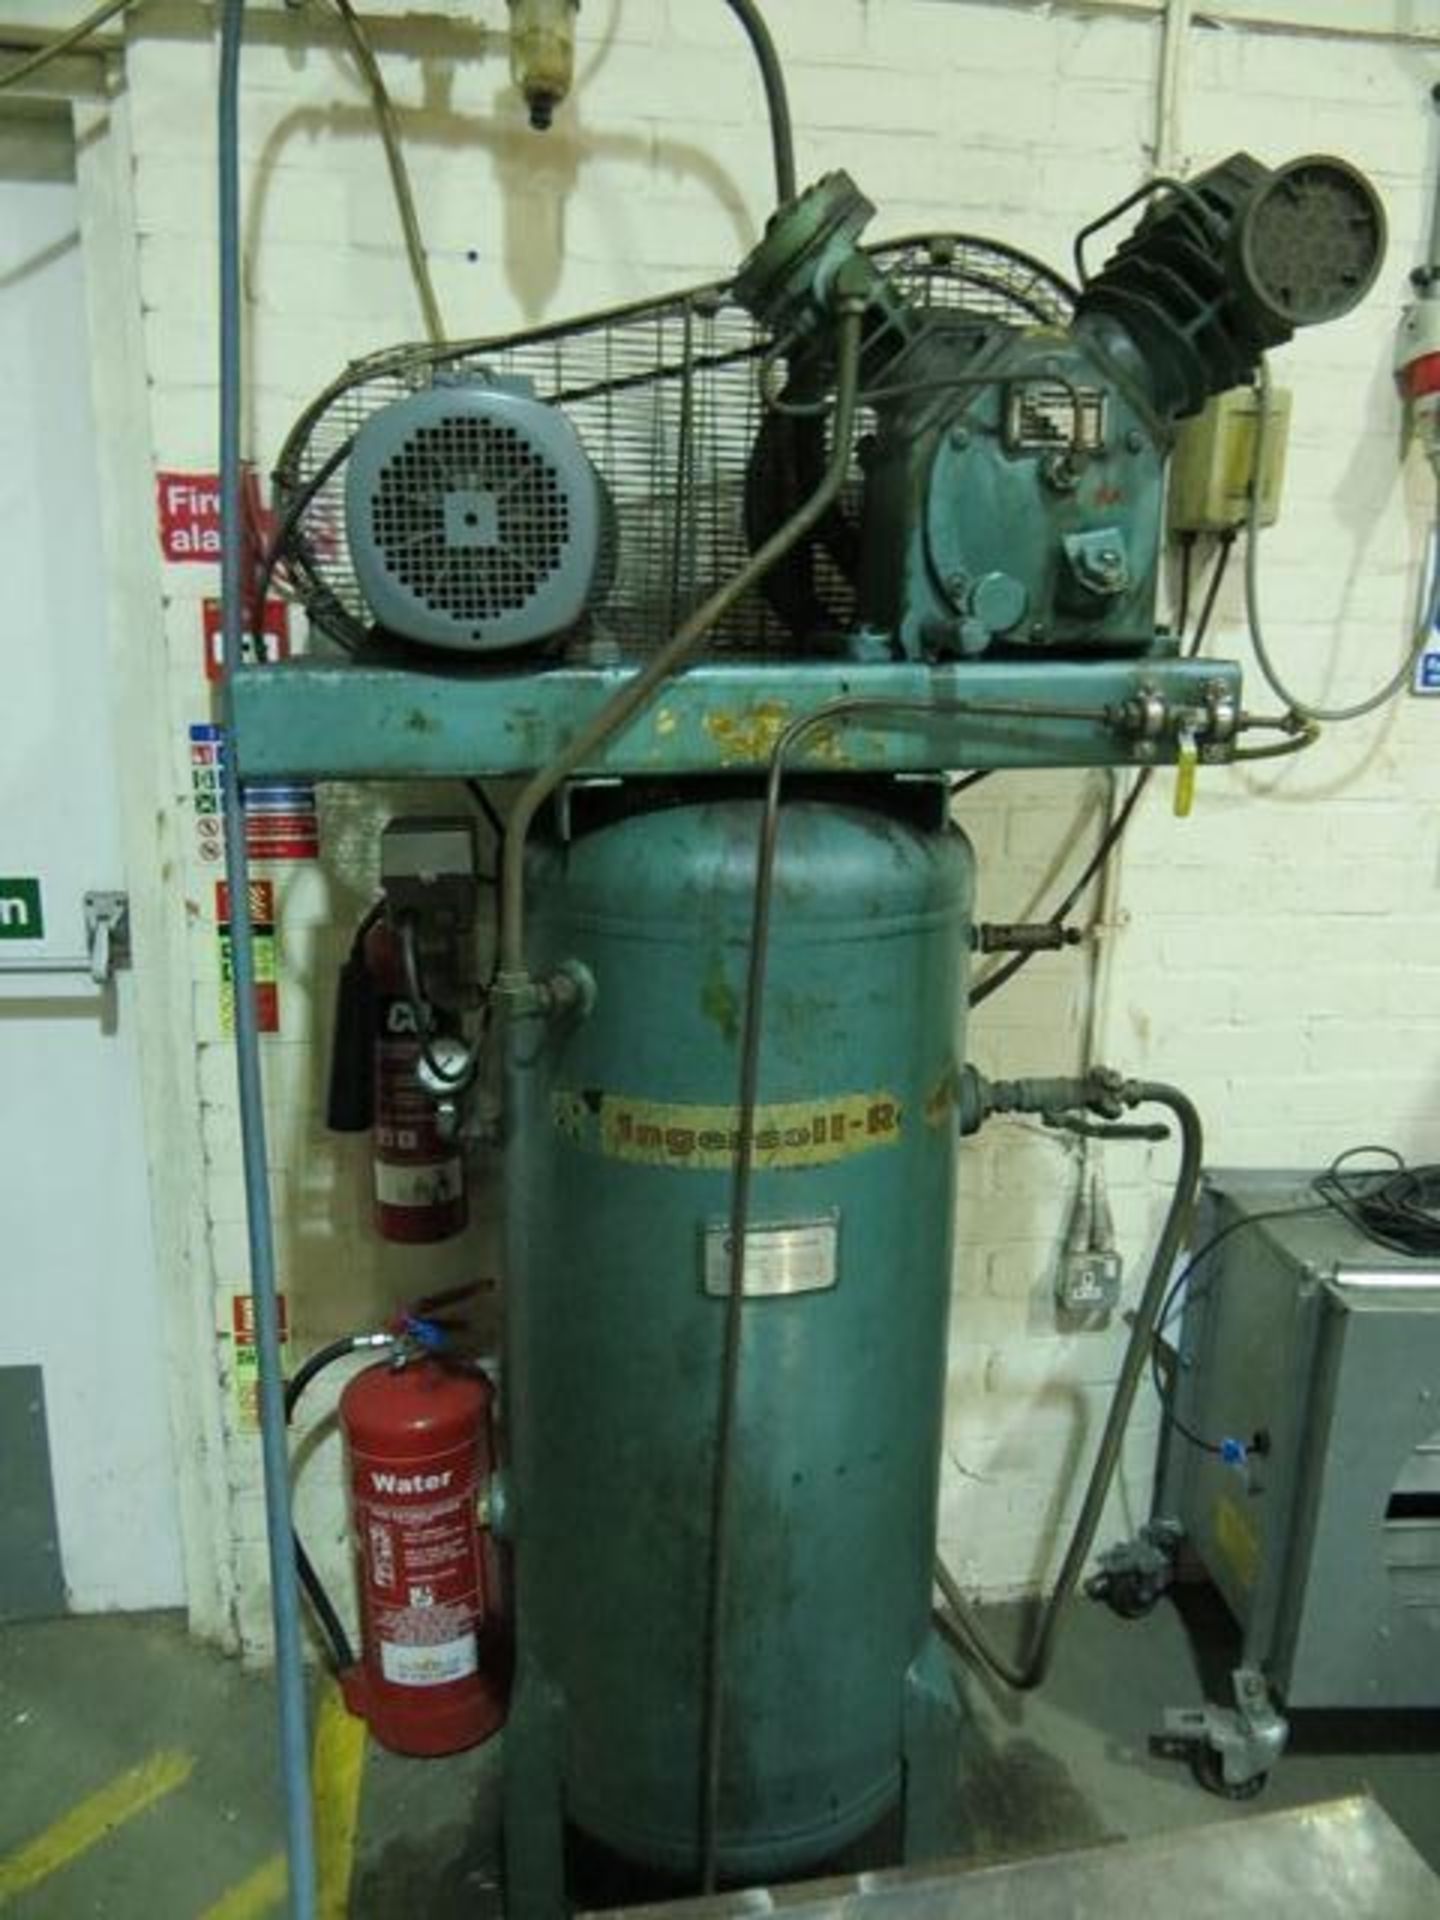 Welded air receiver with Ingersoll Rand type 30 compressor 13 bar 170 litres (c. 1979) (415v)